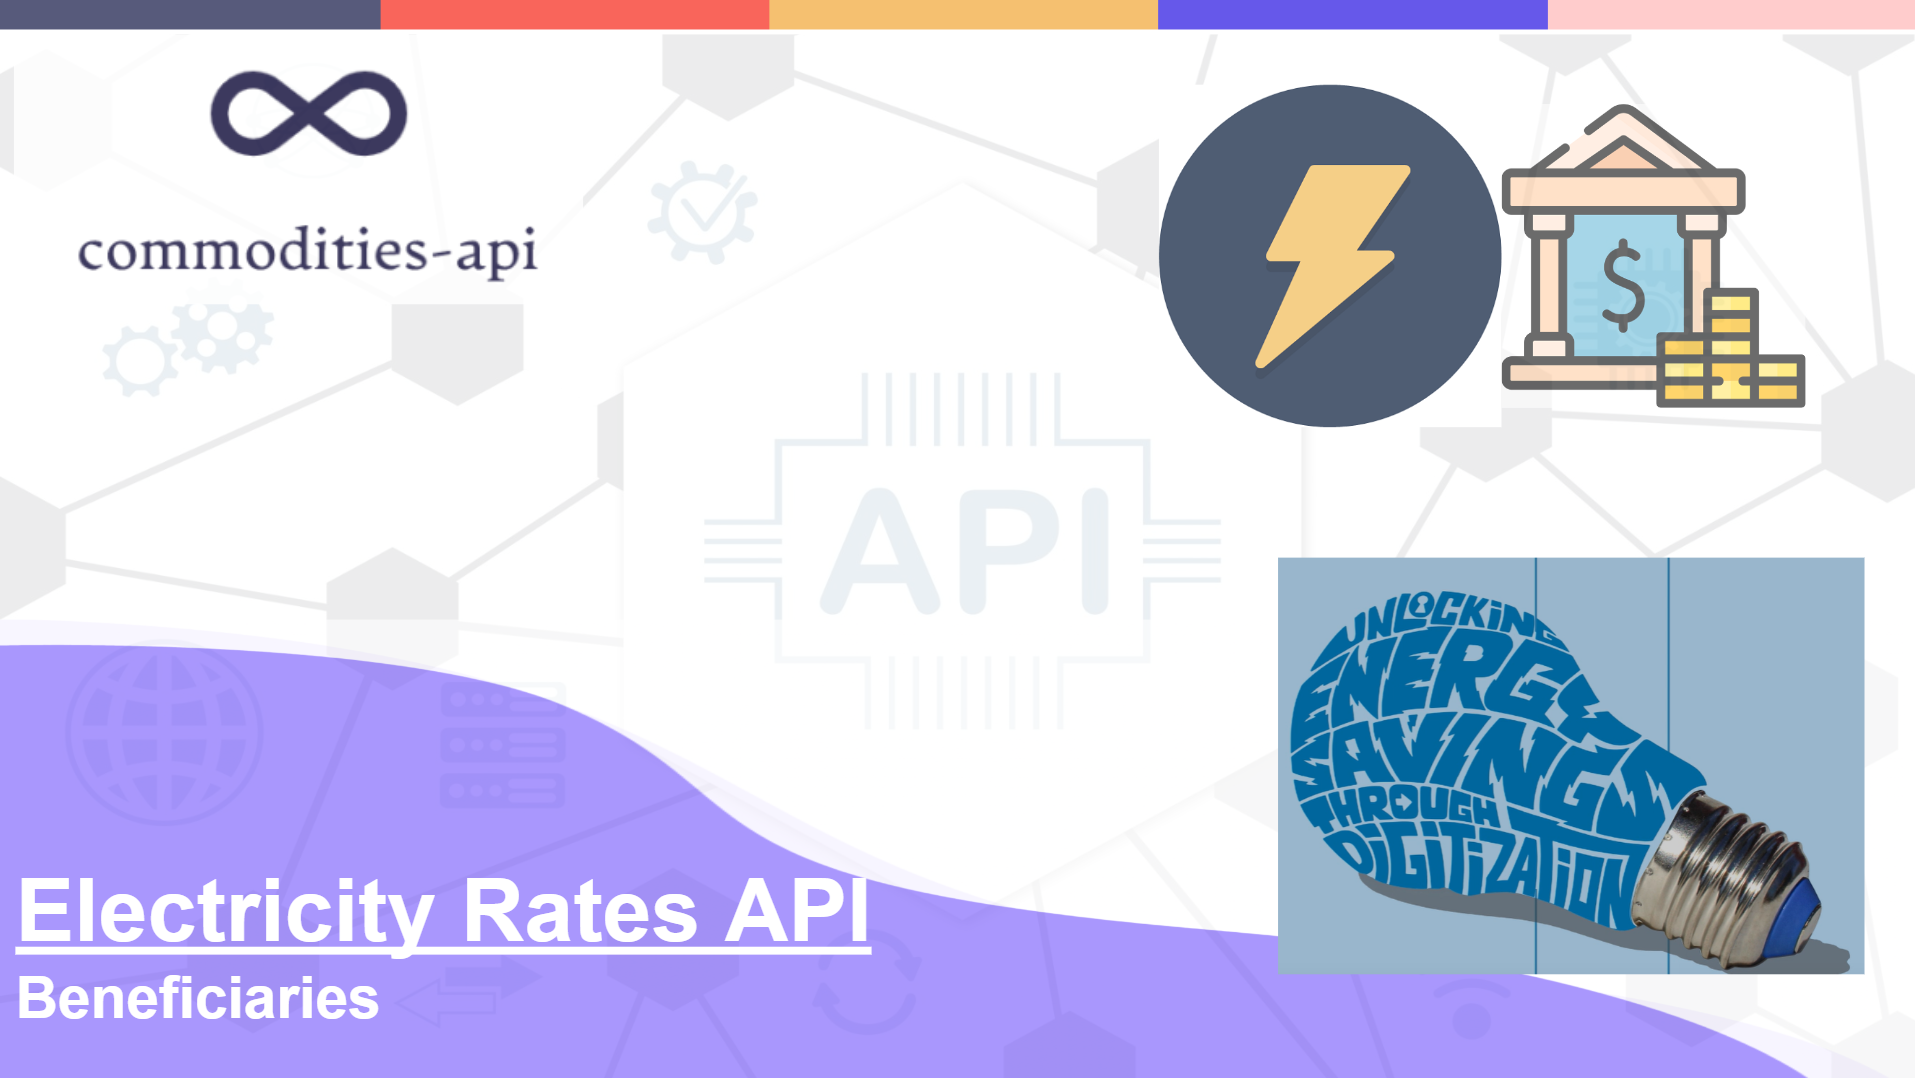 Who Can Benefit From Electricity Rates API?